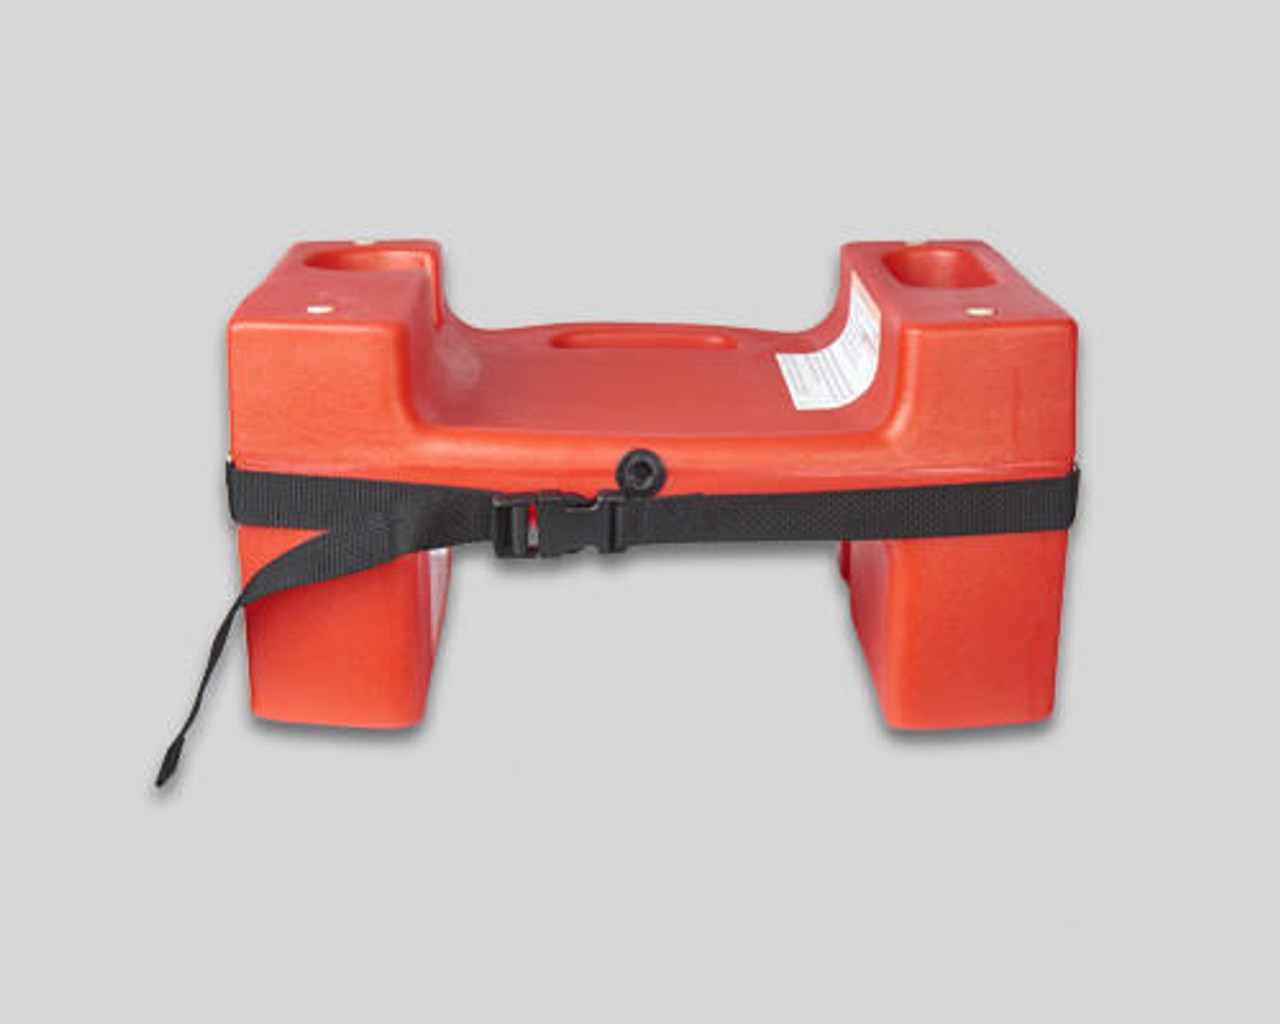 Buy Koala Kare Booster Buddy Red 5Pk W/Strap | Shiffler - Furniture,  Fixtures and Equipment for Schools